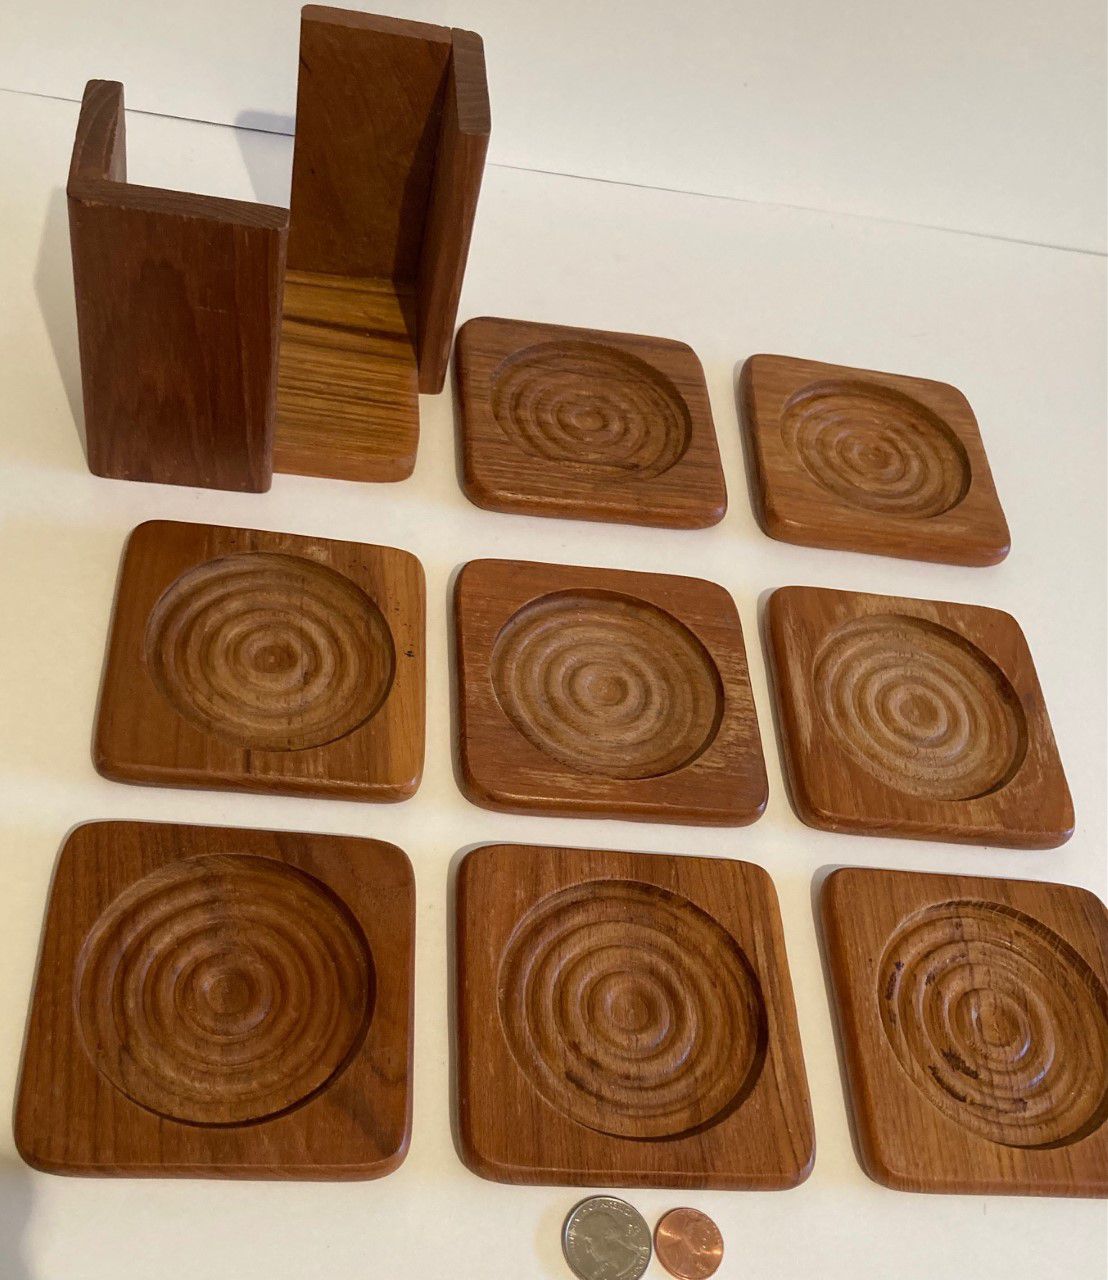 Vintage Wooden 8 Count Coaster Set, Made in Thailand, Quality, Heavy Duty, Kitchen Decor, Table Display, Shelf Display